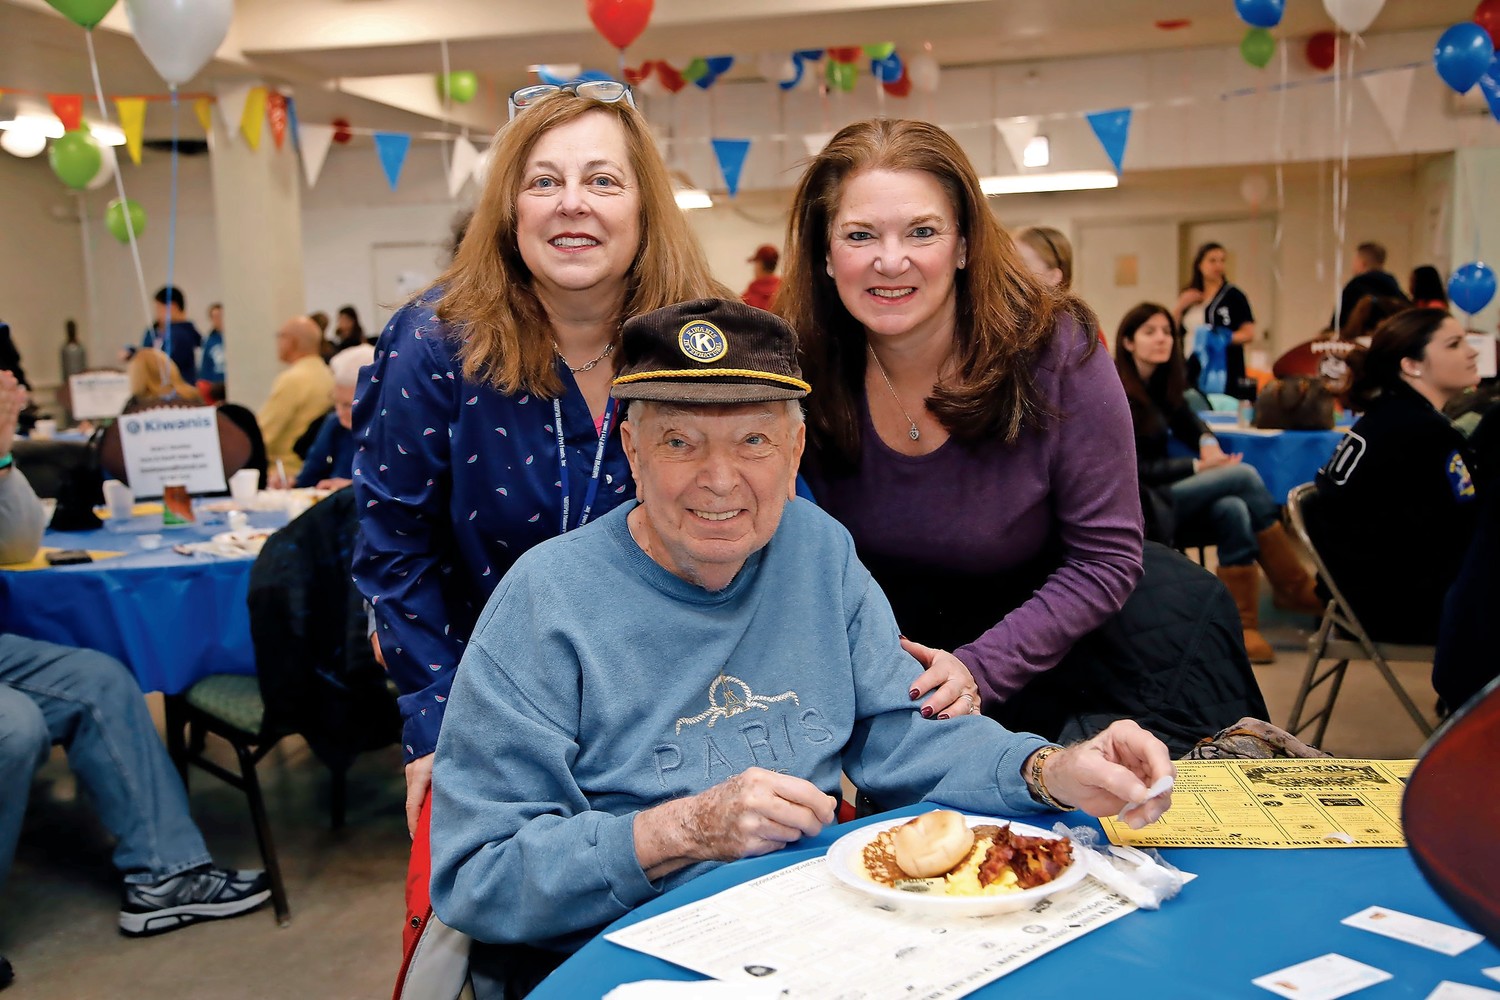 89-year old Kiwanian Dan Rosenberg with his daughters Penny Frondelli and Mindy Mirsky.